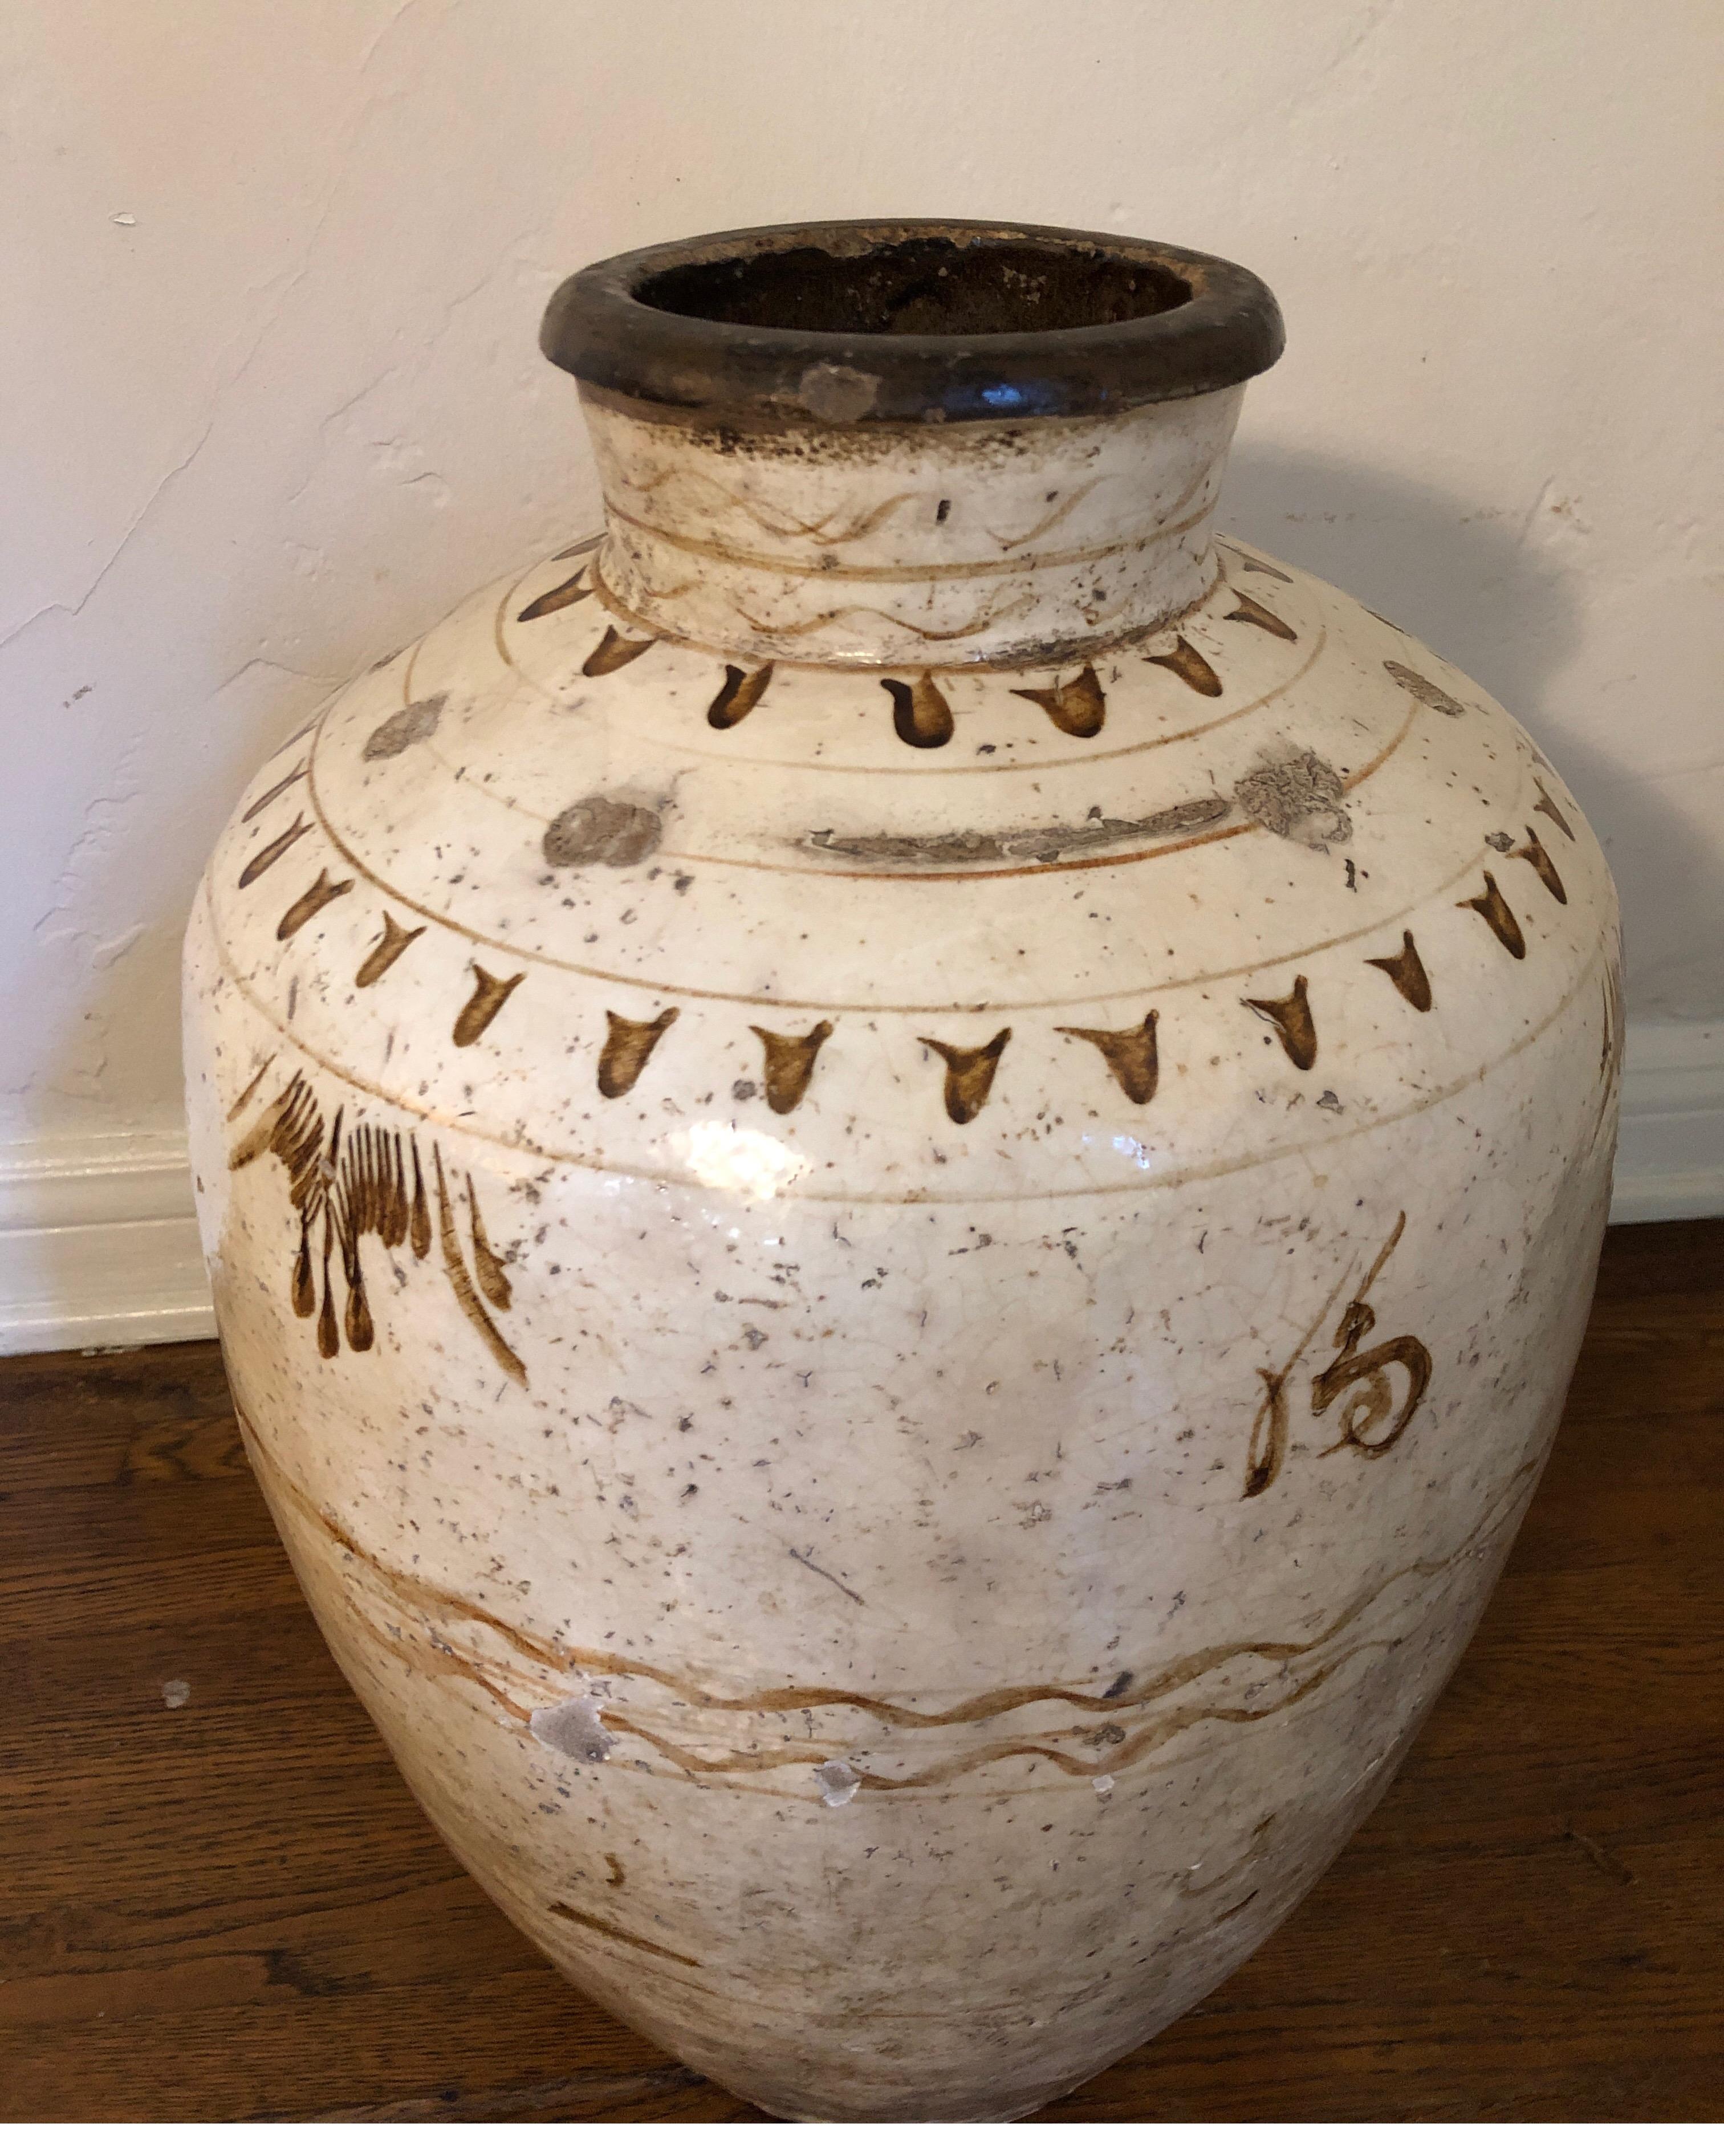 Ming dynasty cizhou vase.
Hand painted tribal motives and calligraphy. Glazed.

Was made into a lamp at one point so has small hole in bottom. See pics.